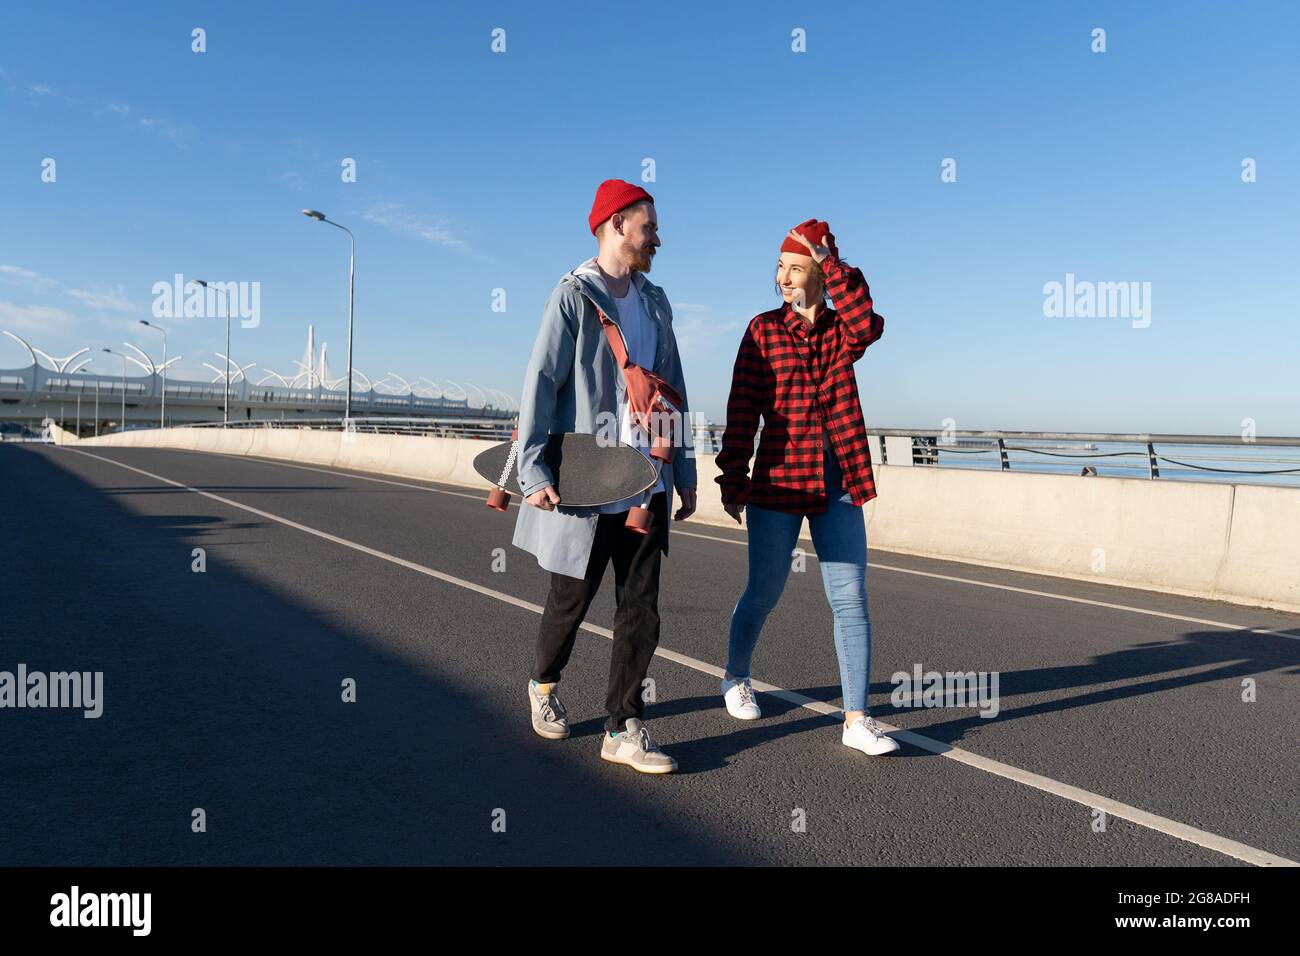 Stylish young couple of male and female walk together on bridge after longboard skating on bridge Stock Photo